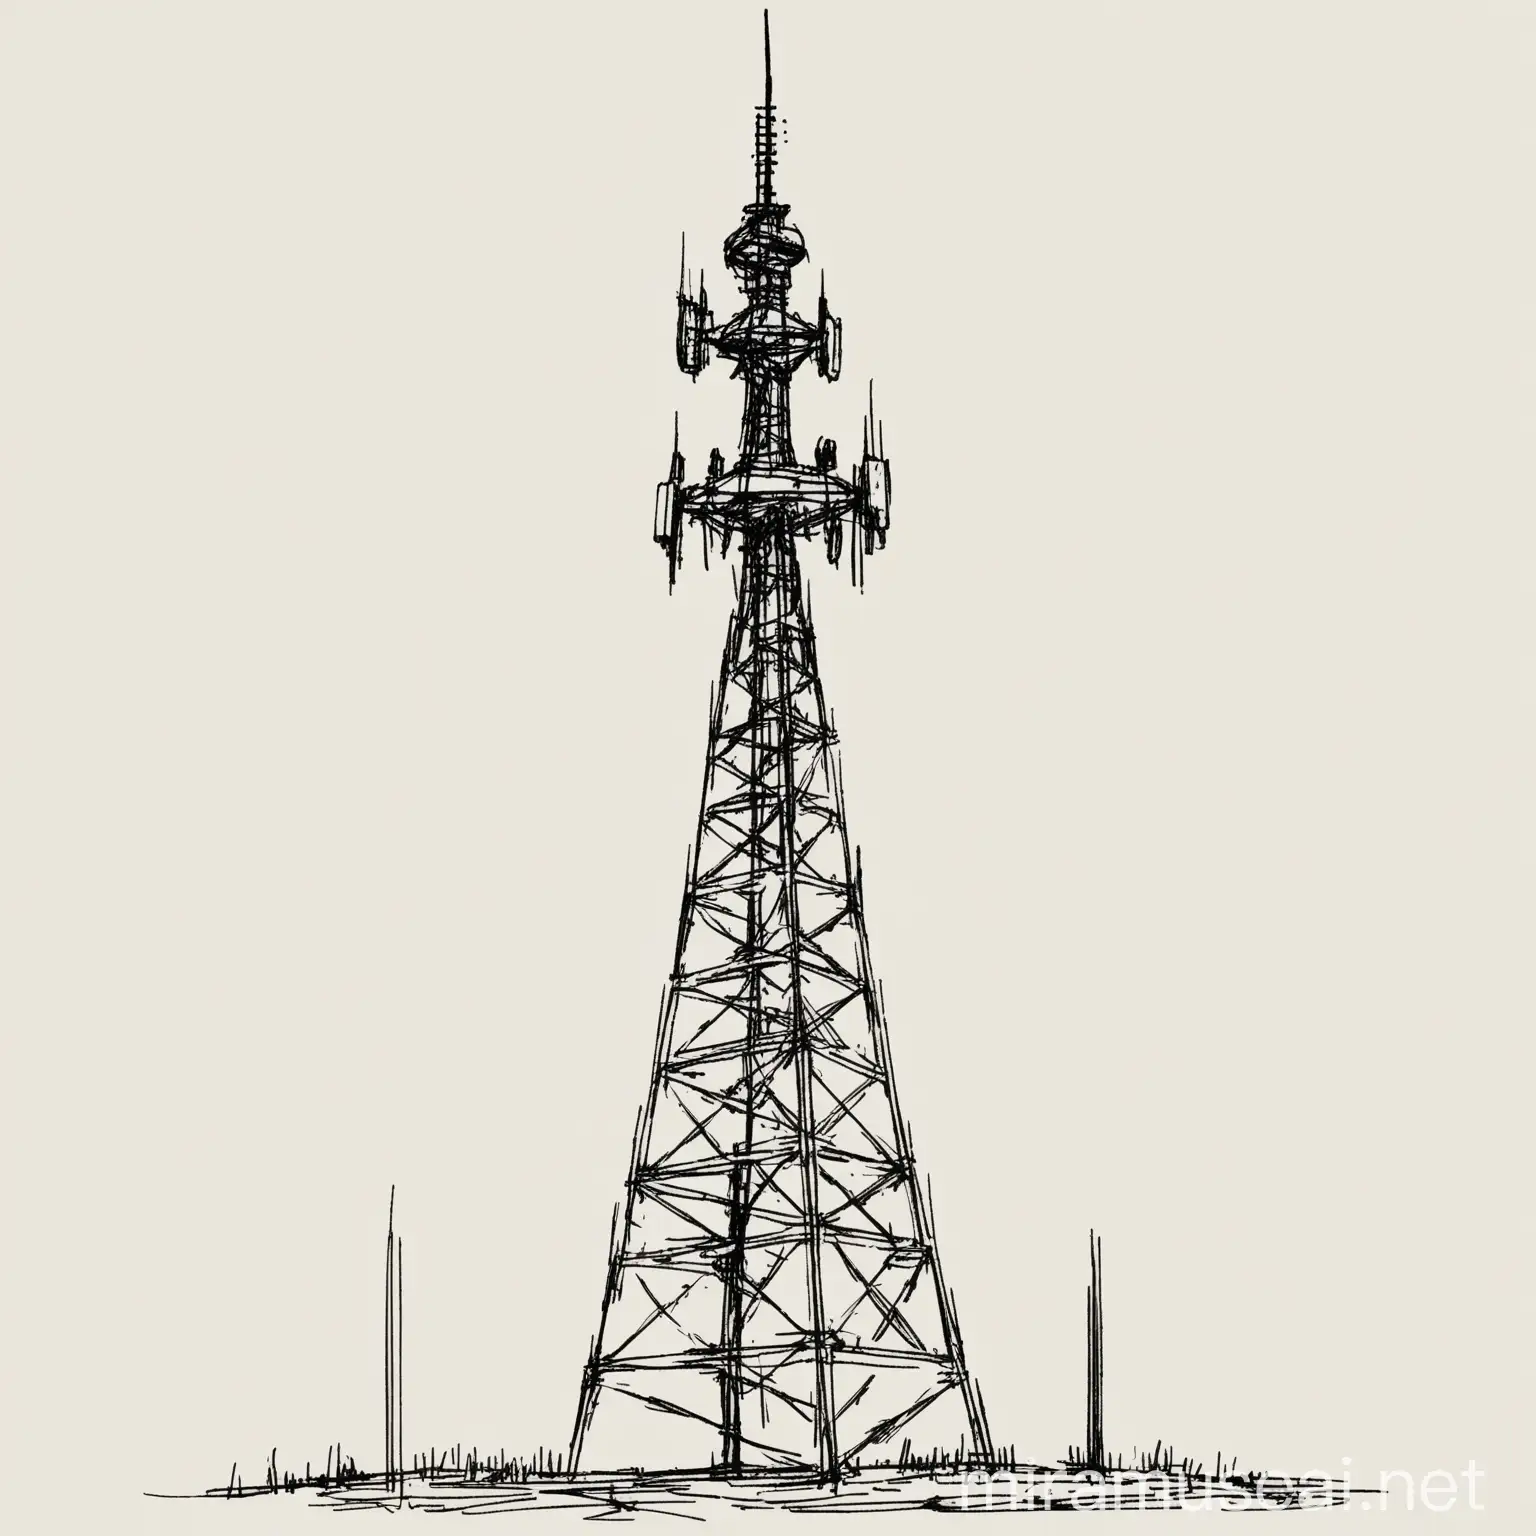 Sketch of Radio Tower against Neutral Background